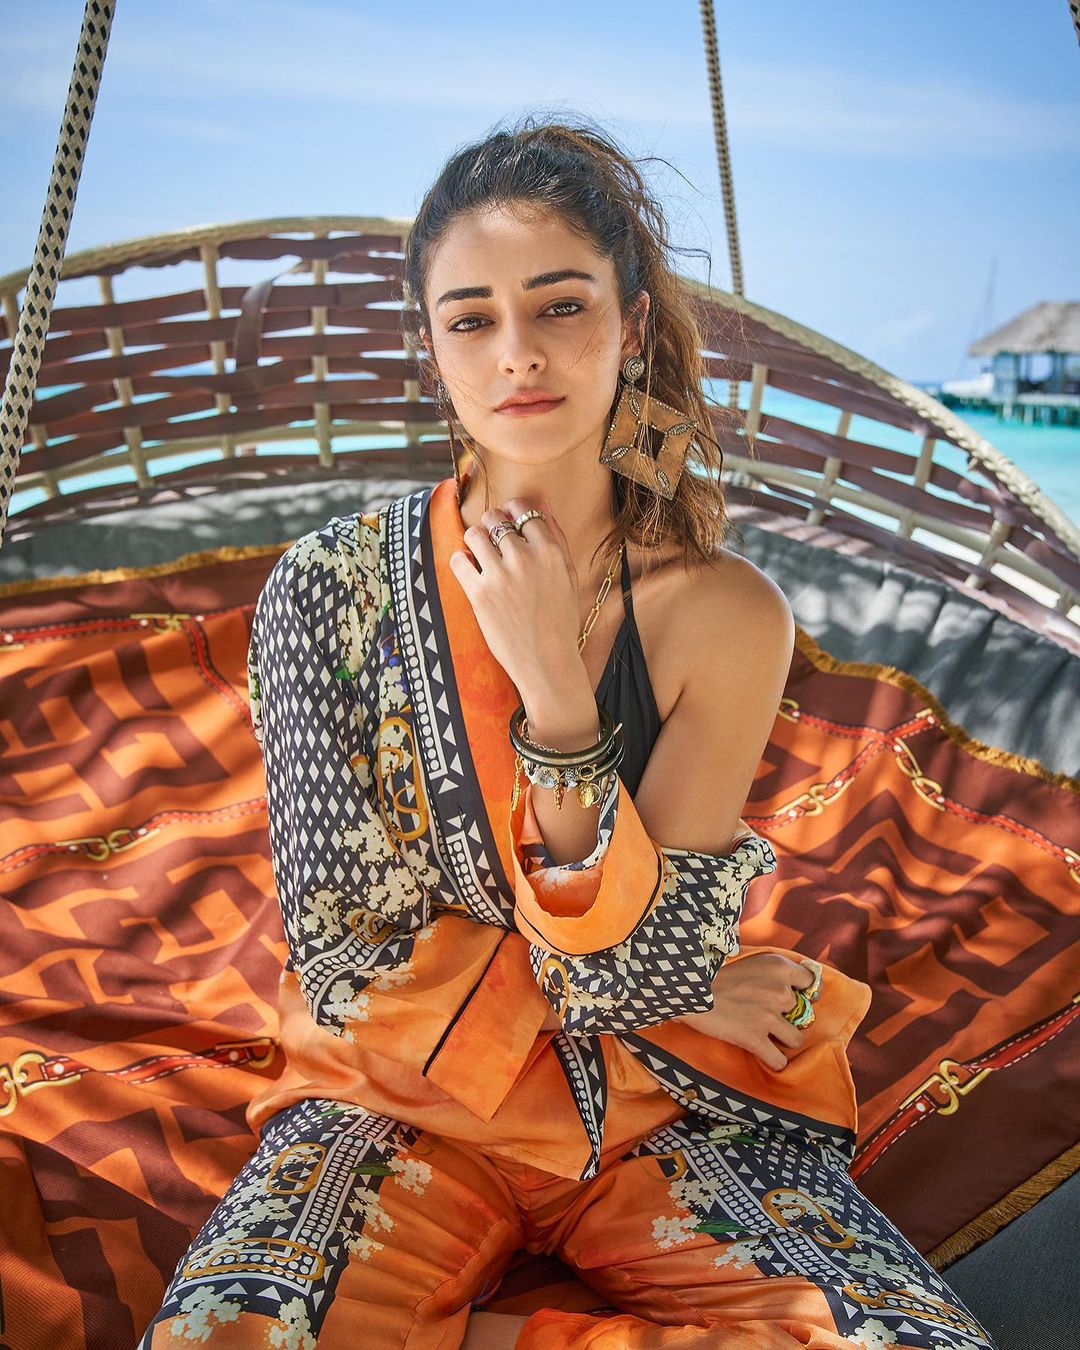 ananya panday gives bold and boho vibes in orange t shirt and black bikini check out pictures 2 Ananya Panday offers Daring and Boho vibes in Orange T-shirt and black bikini, Take a look at Images | IWMBuzz